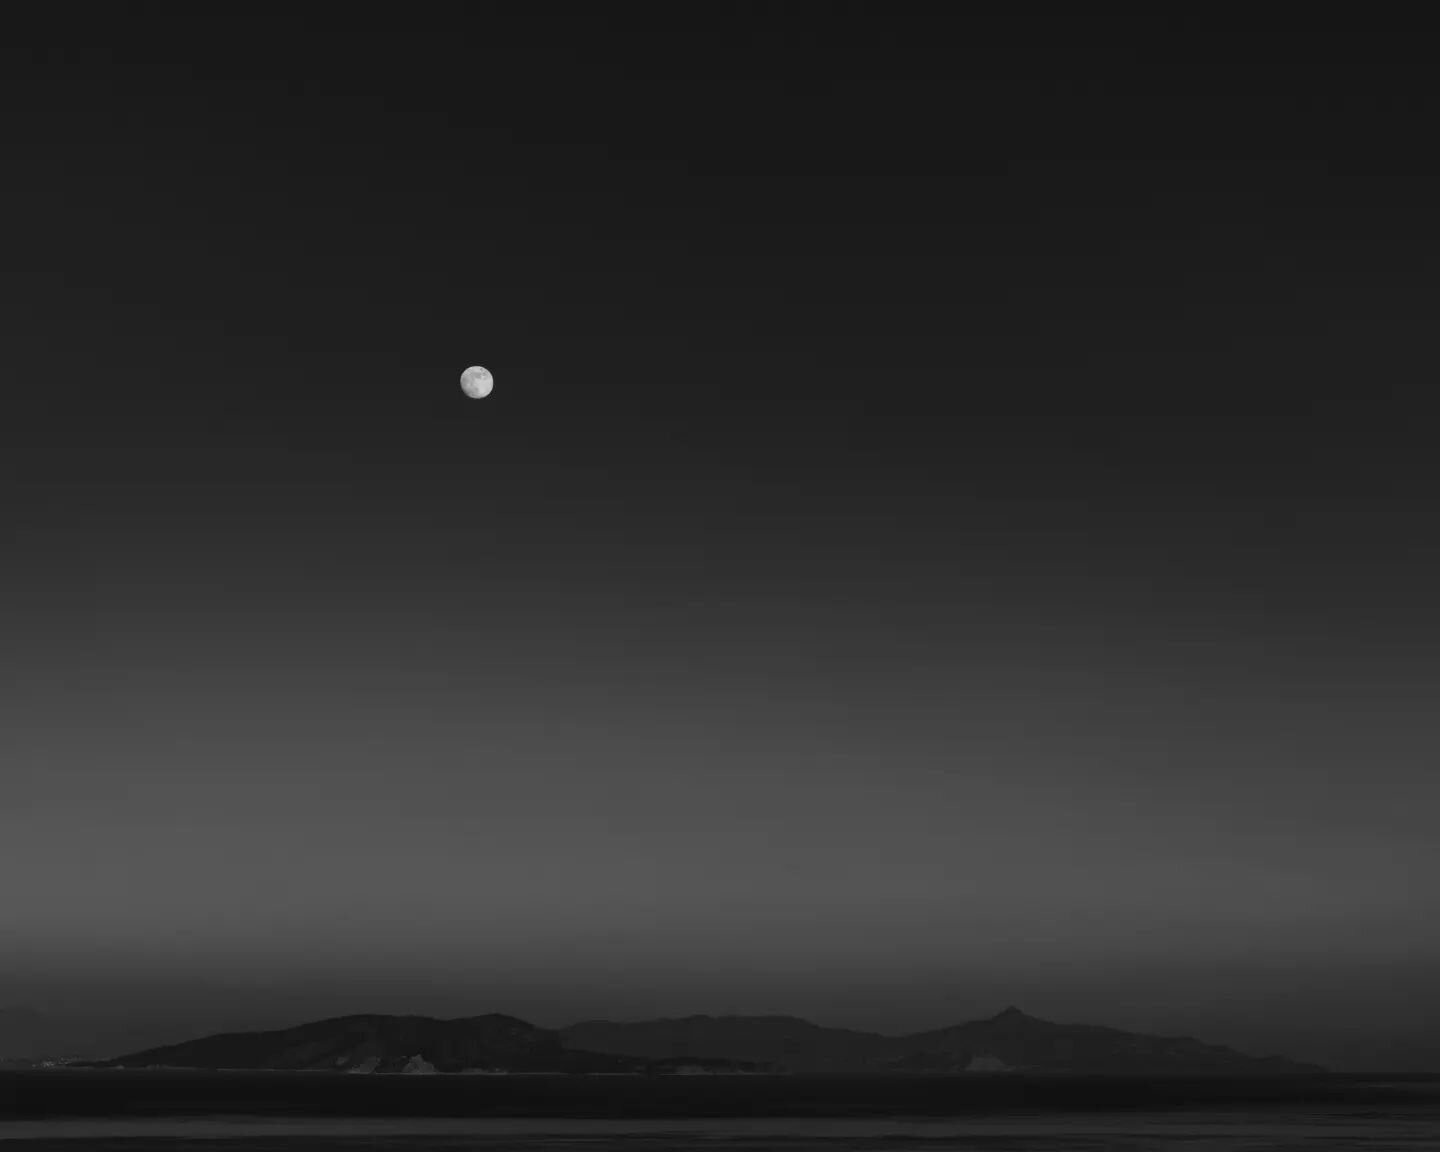 The waxing gibbous moon is rising behind the islands of Agistri and Aegina at the Saronic Gulf. The clear evening sky of the 25th of December was the reason why I had the opportunity to capture this minimalist shot. A calm evening without clouds and 